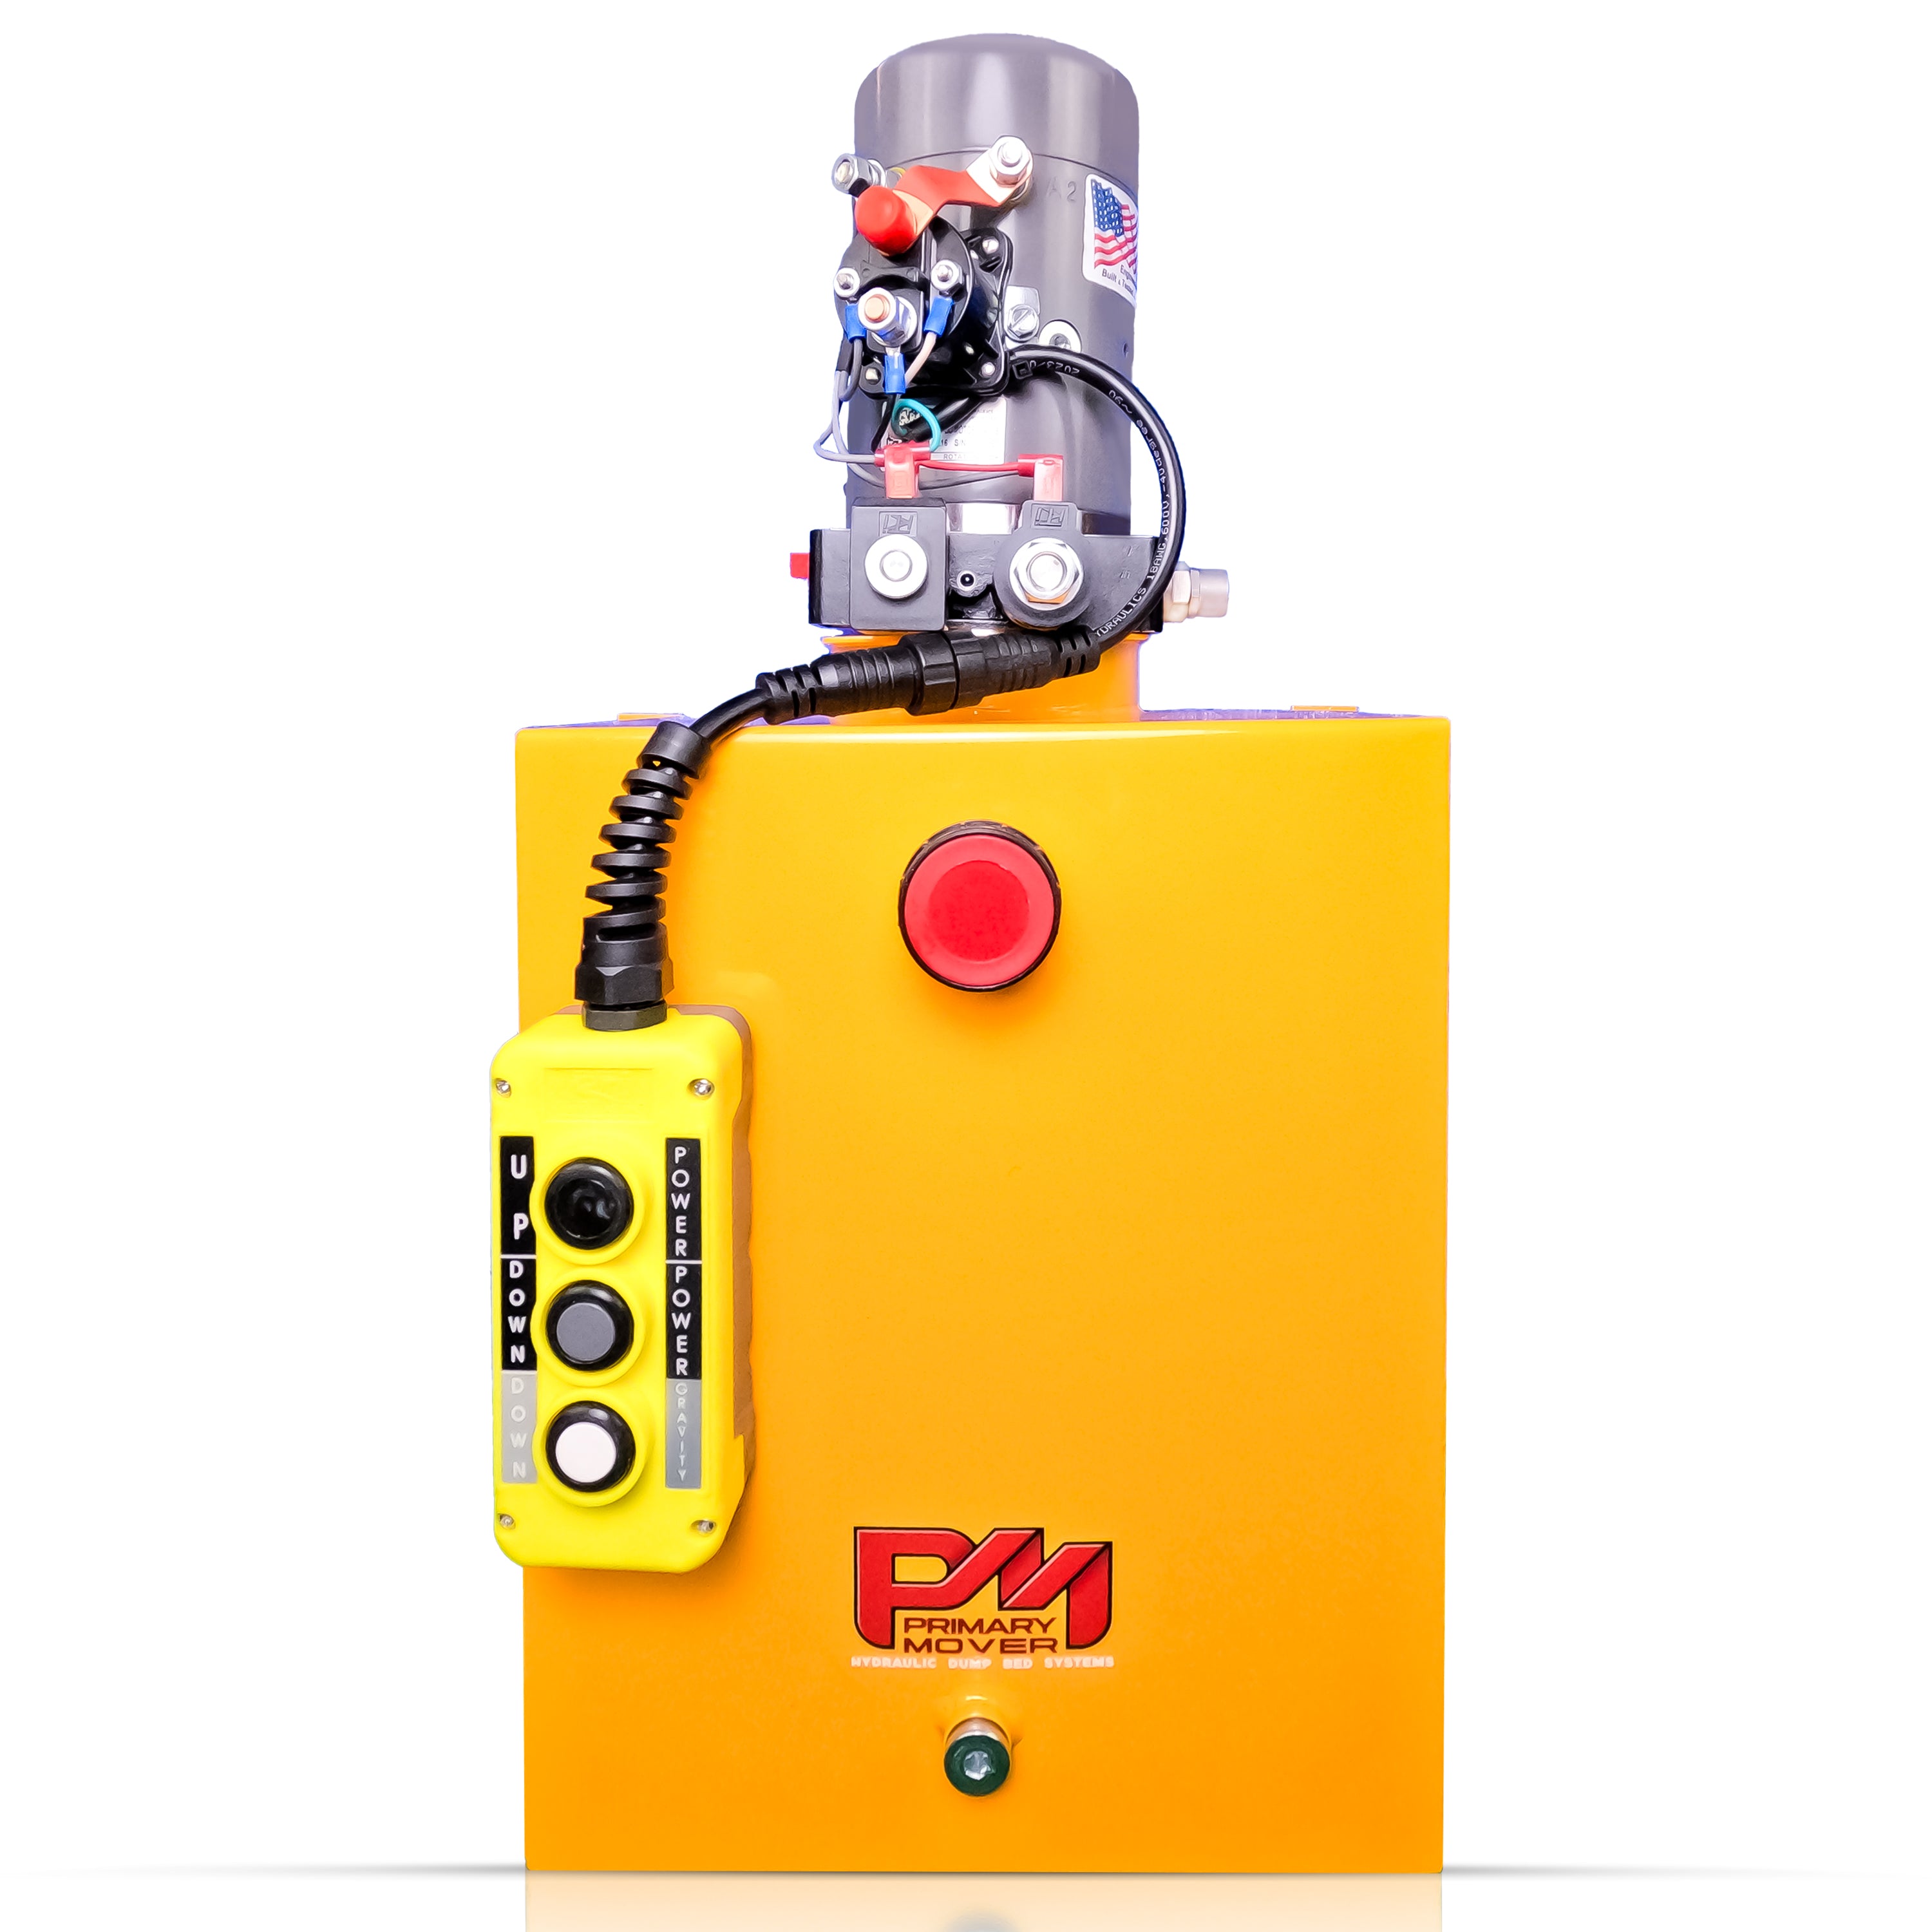 KTI 12V Double-Acting Hydraulic Pump with Steel Reservoir, featuring a compact yellow box, round cylinder, and control button, designed for efficient lifting and lowering.